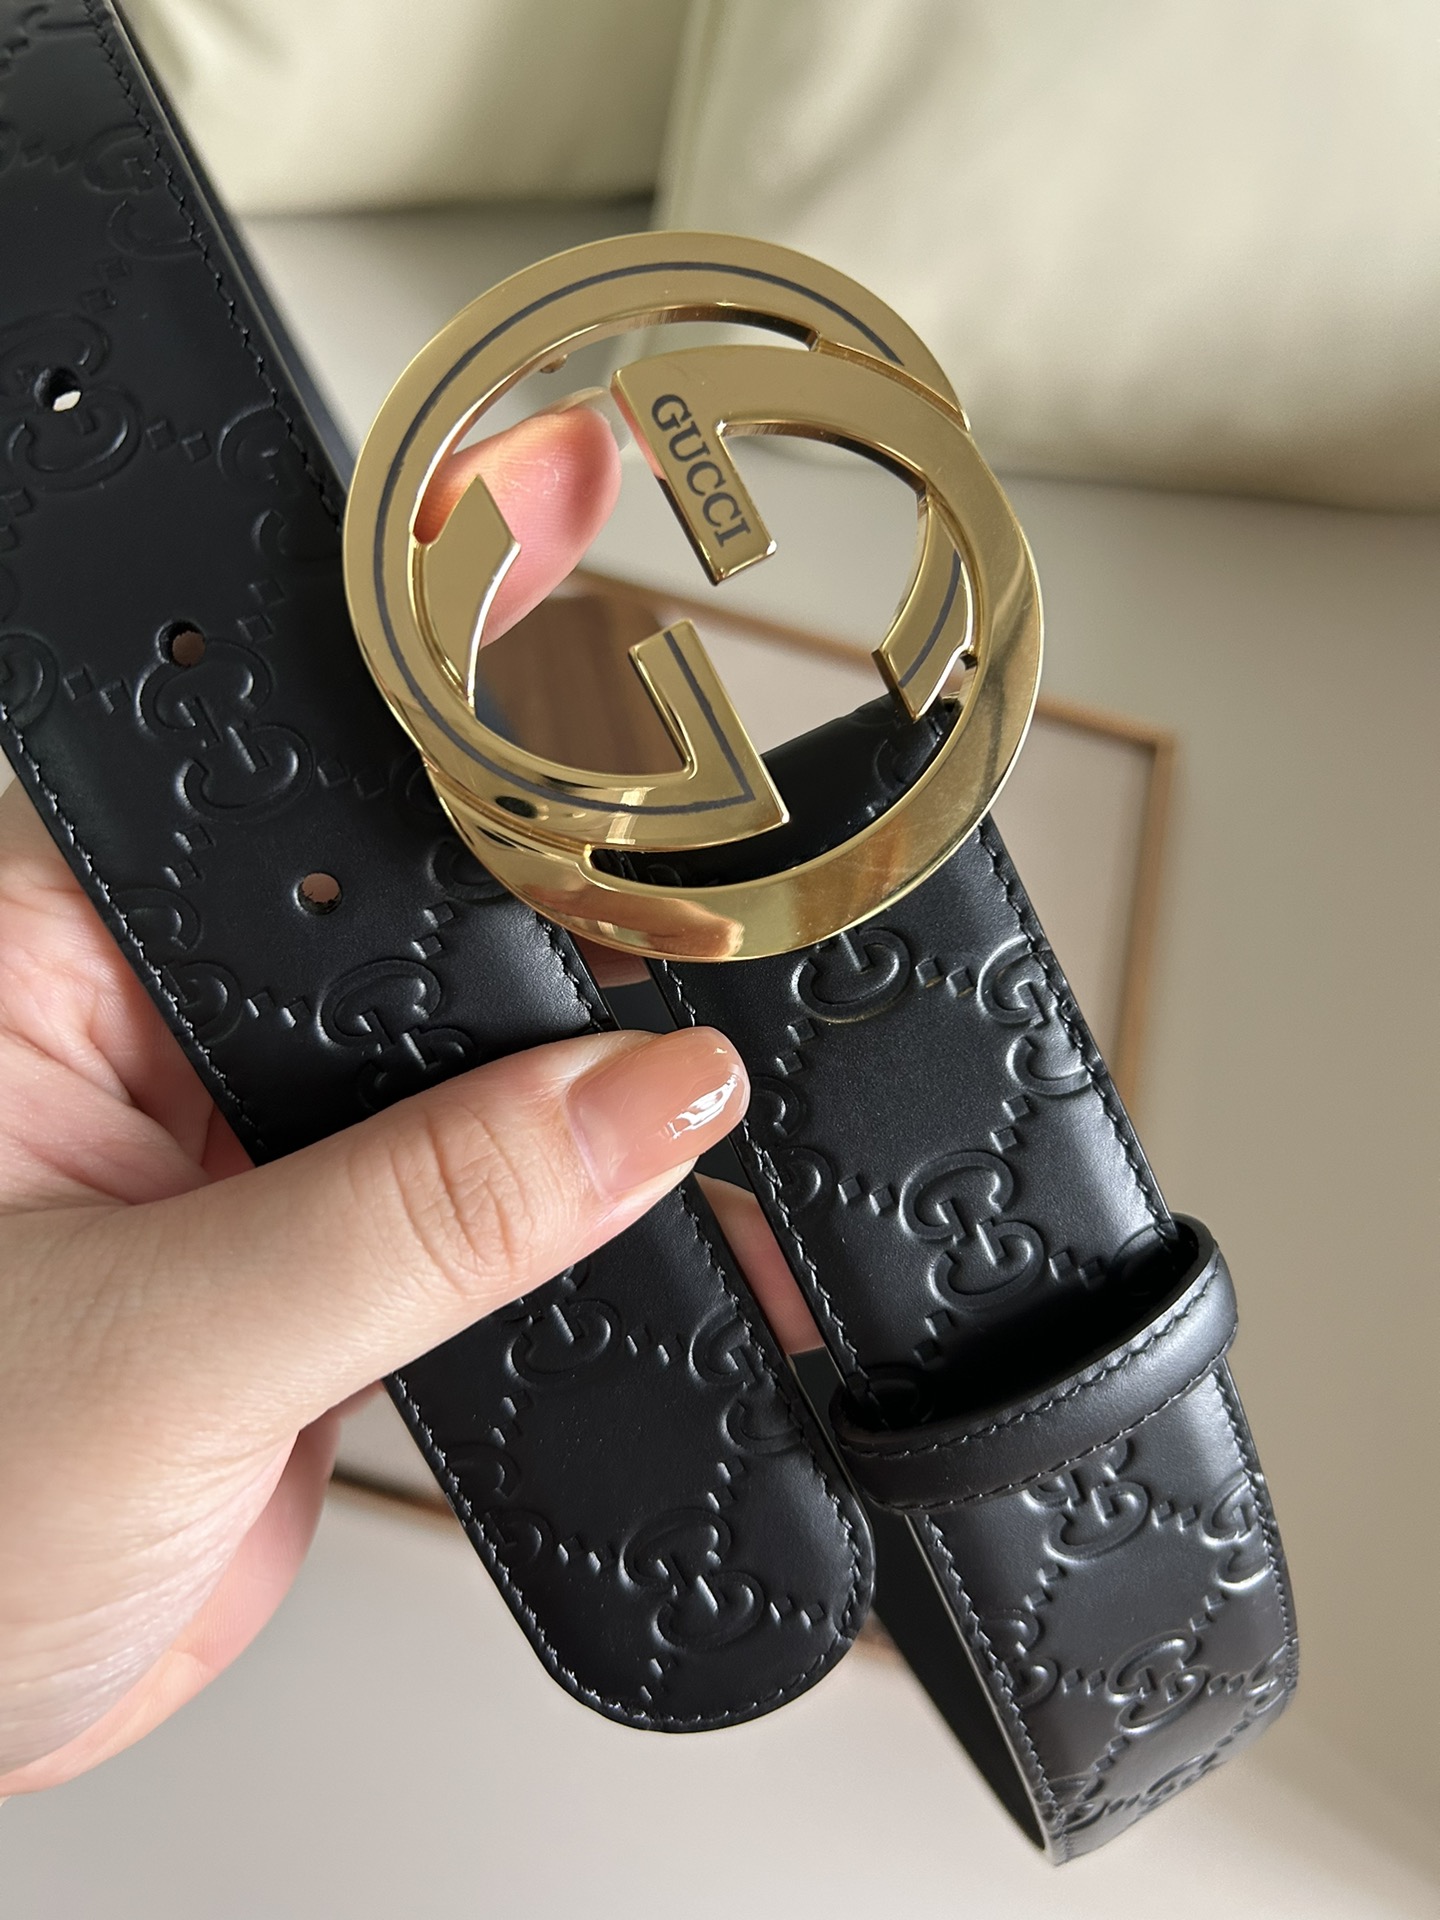 Gucci leather belts